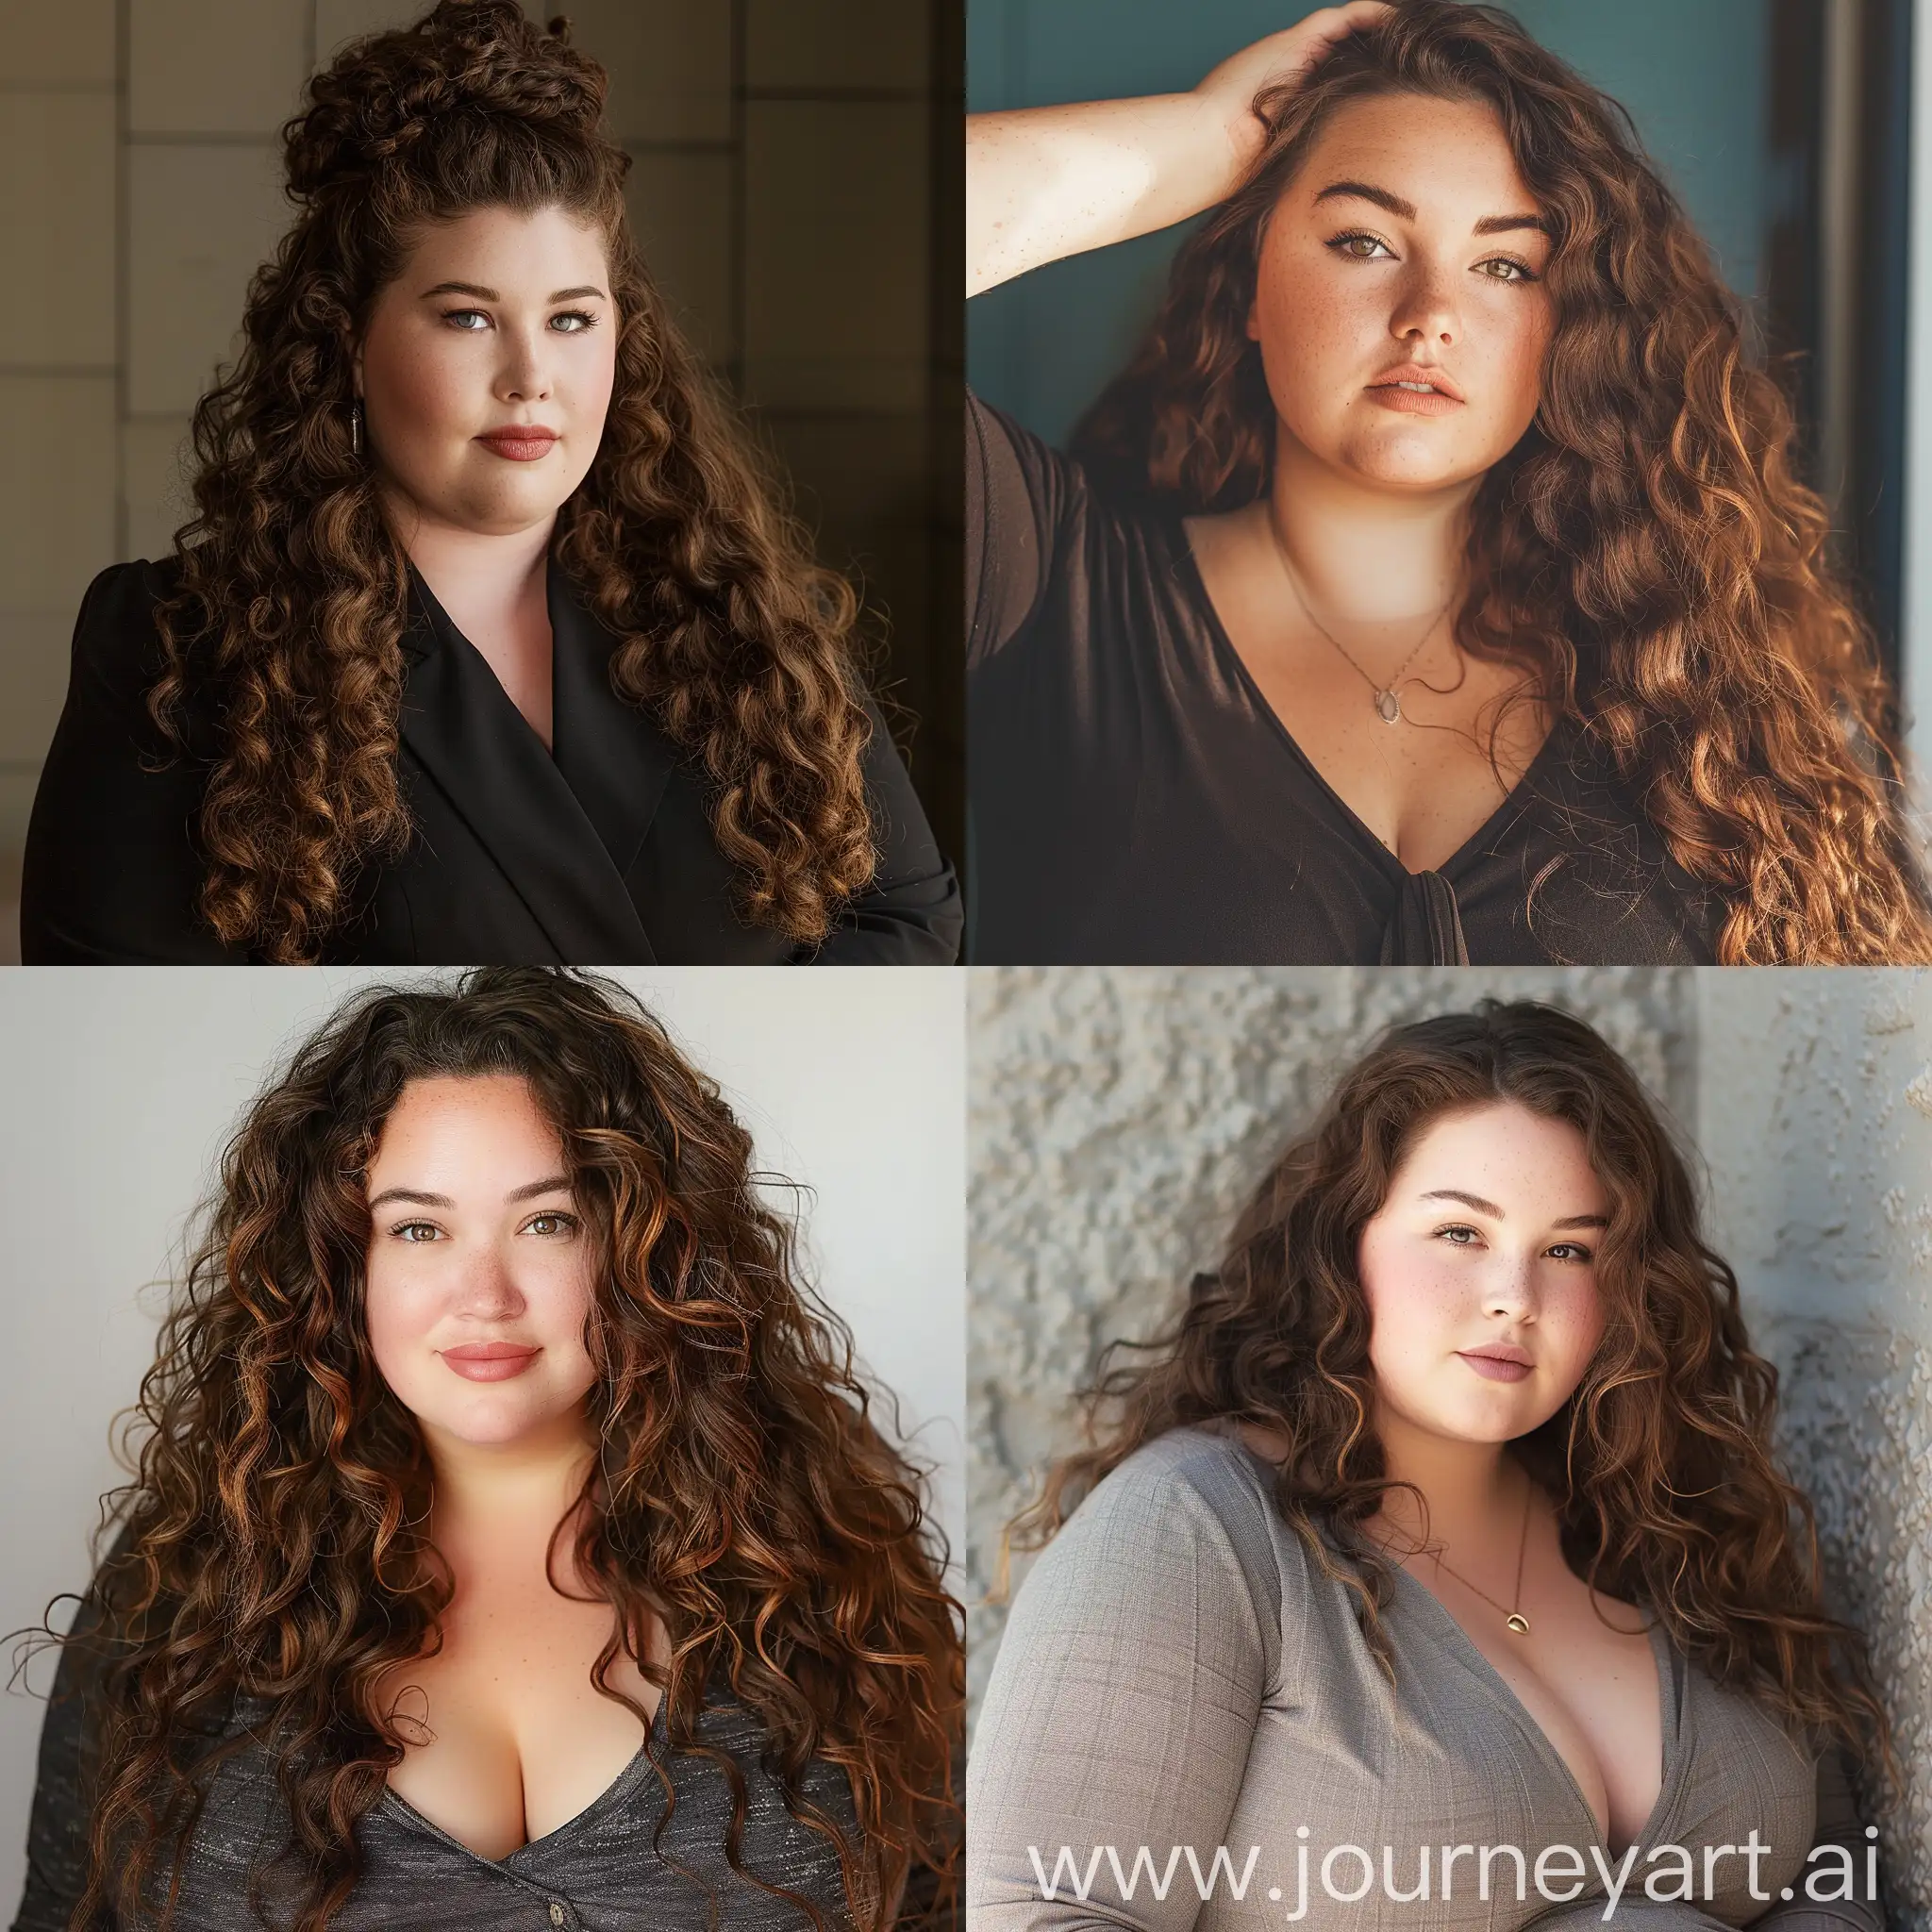 Fashionable-PlusSize-Office-Portrait-of-a-BrownHaired-Woman